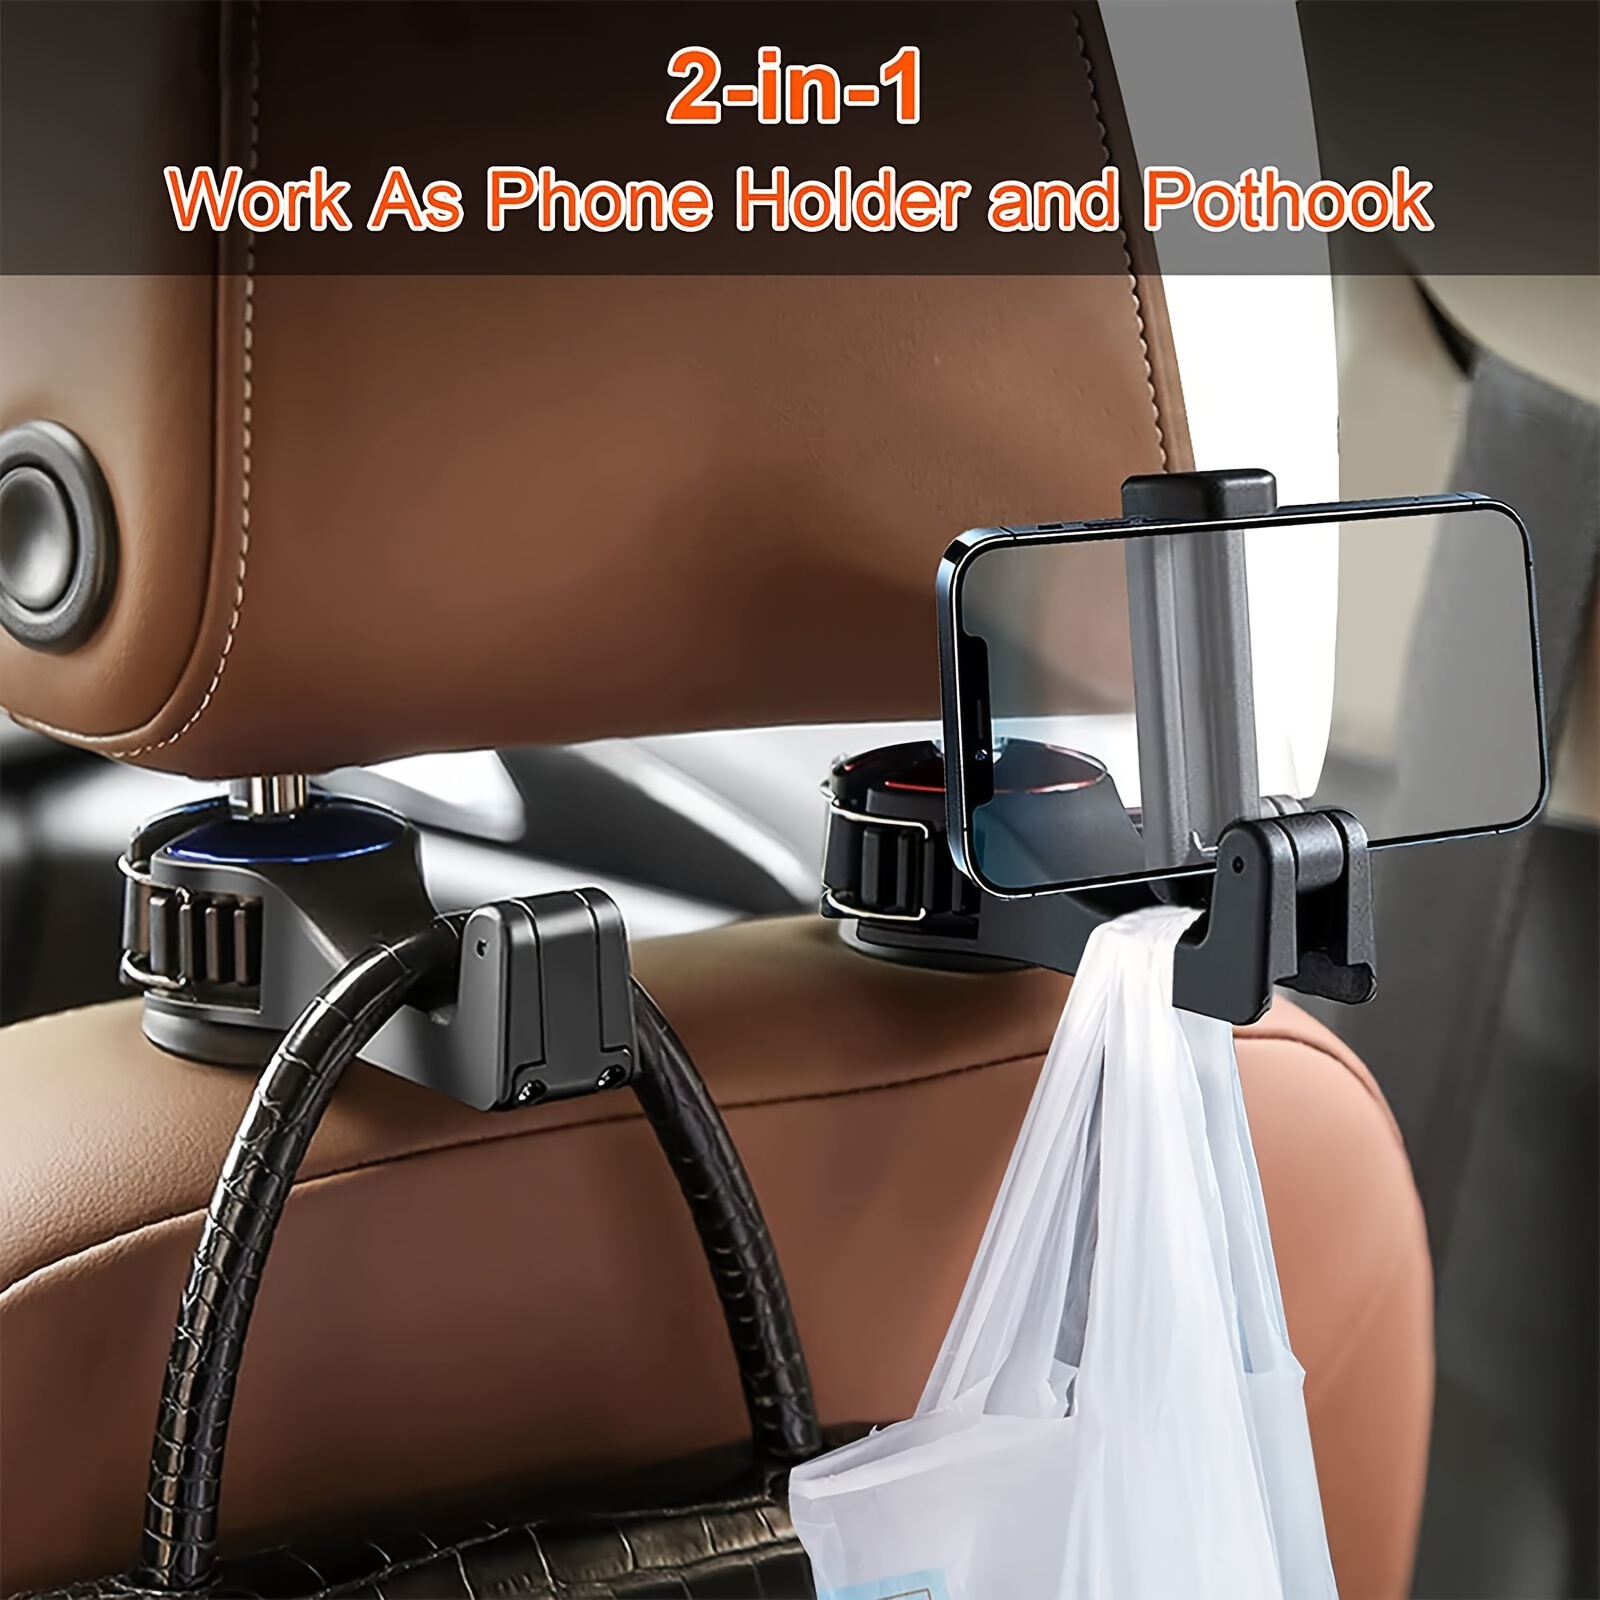 

2-in-1 Hook With 360° Rotatable Phone Holder, Abs Material, Auto Vehicle Mount, Rotatable Device Mount Features